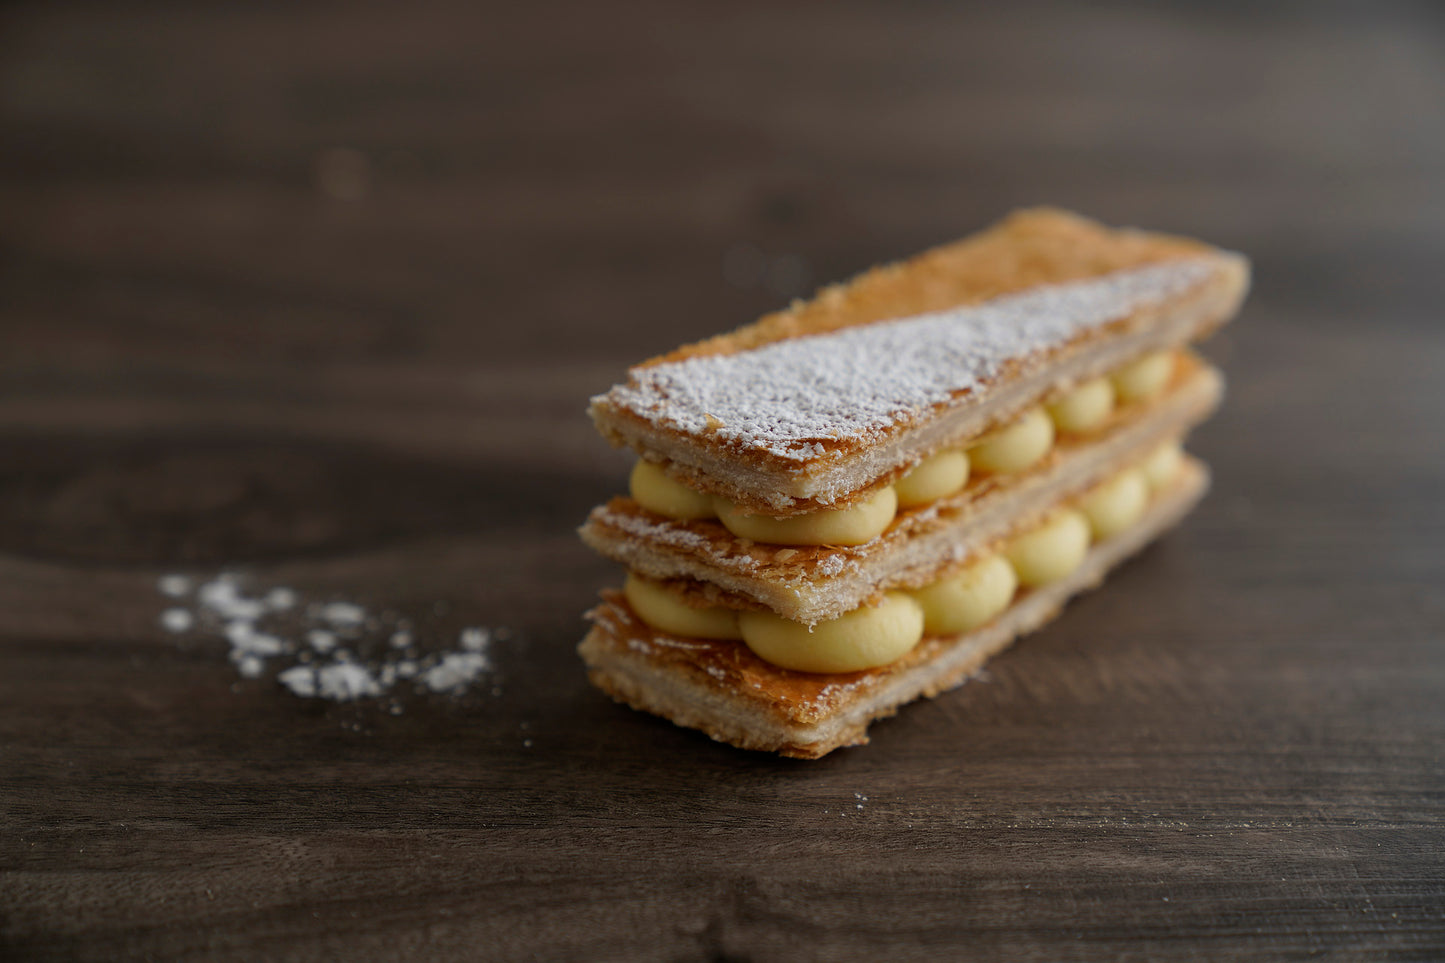 Thin layers of puff pastry filled with creamy vanilla mousseline